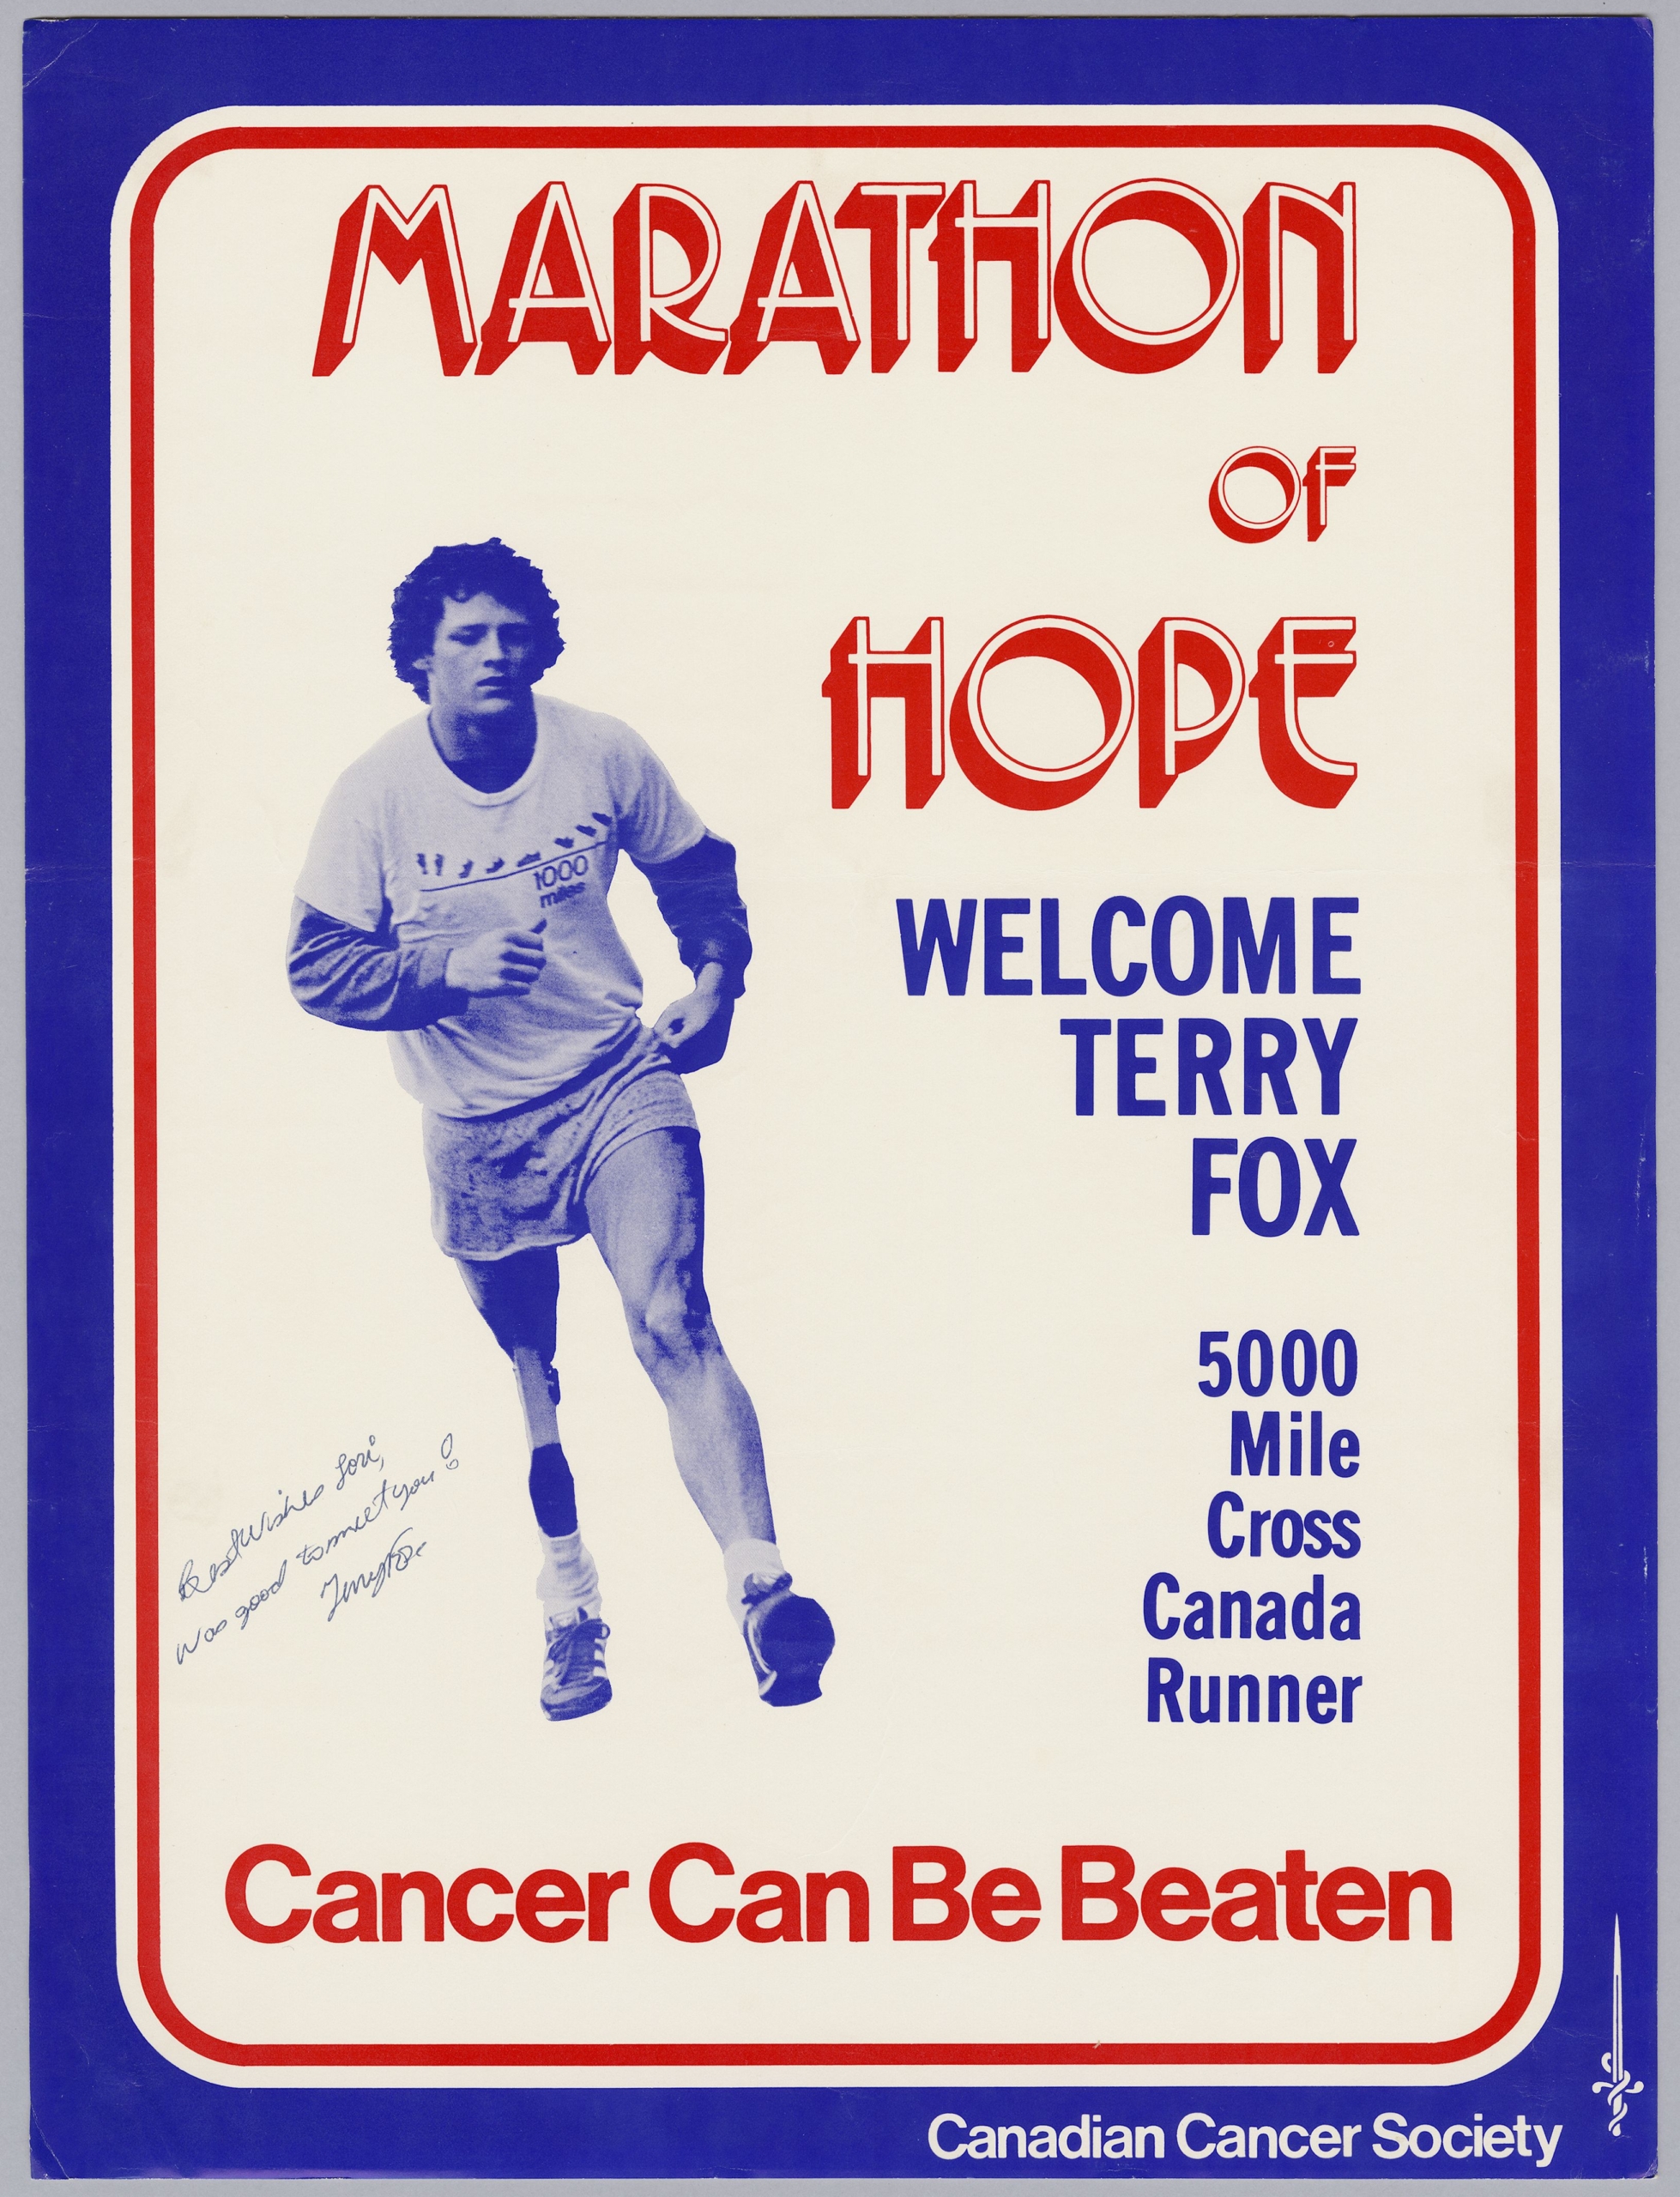 Poster for Marathon of Hope featuring image of Terry Fox